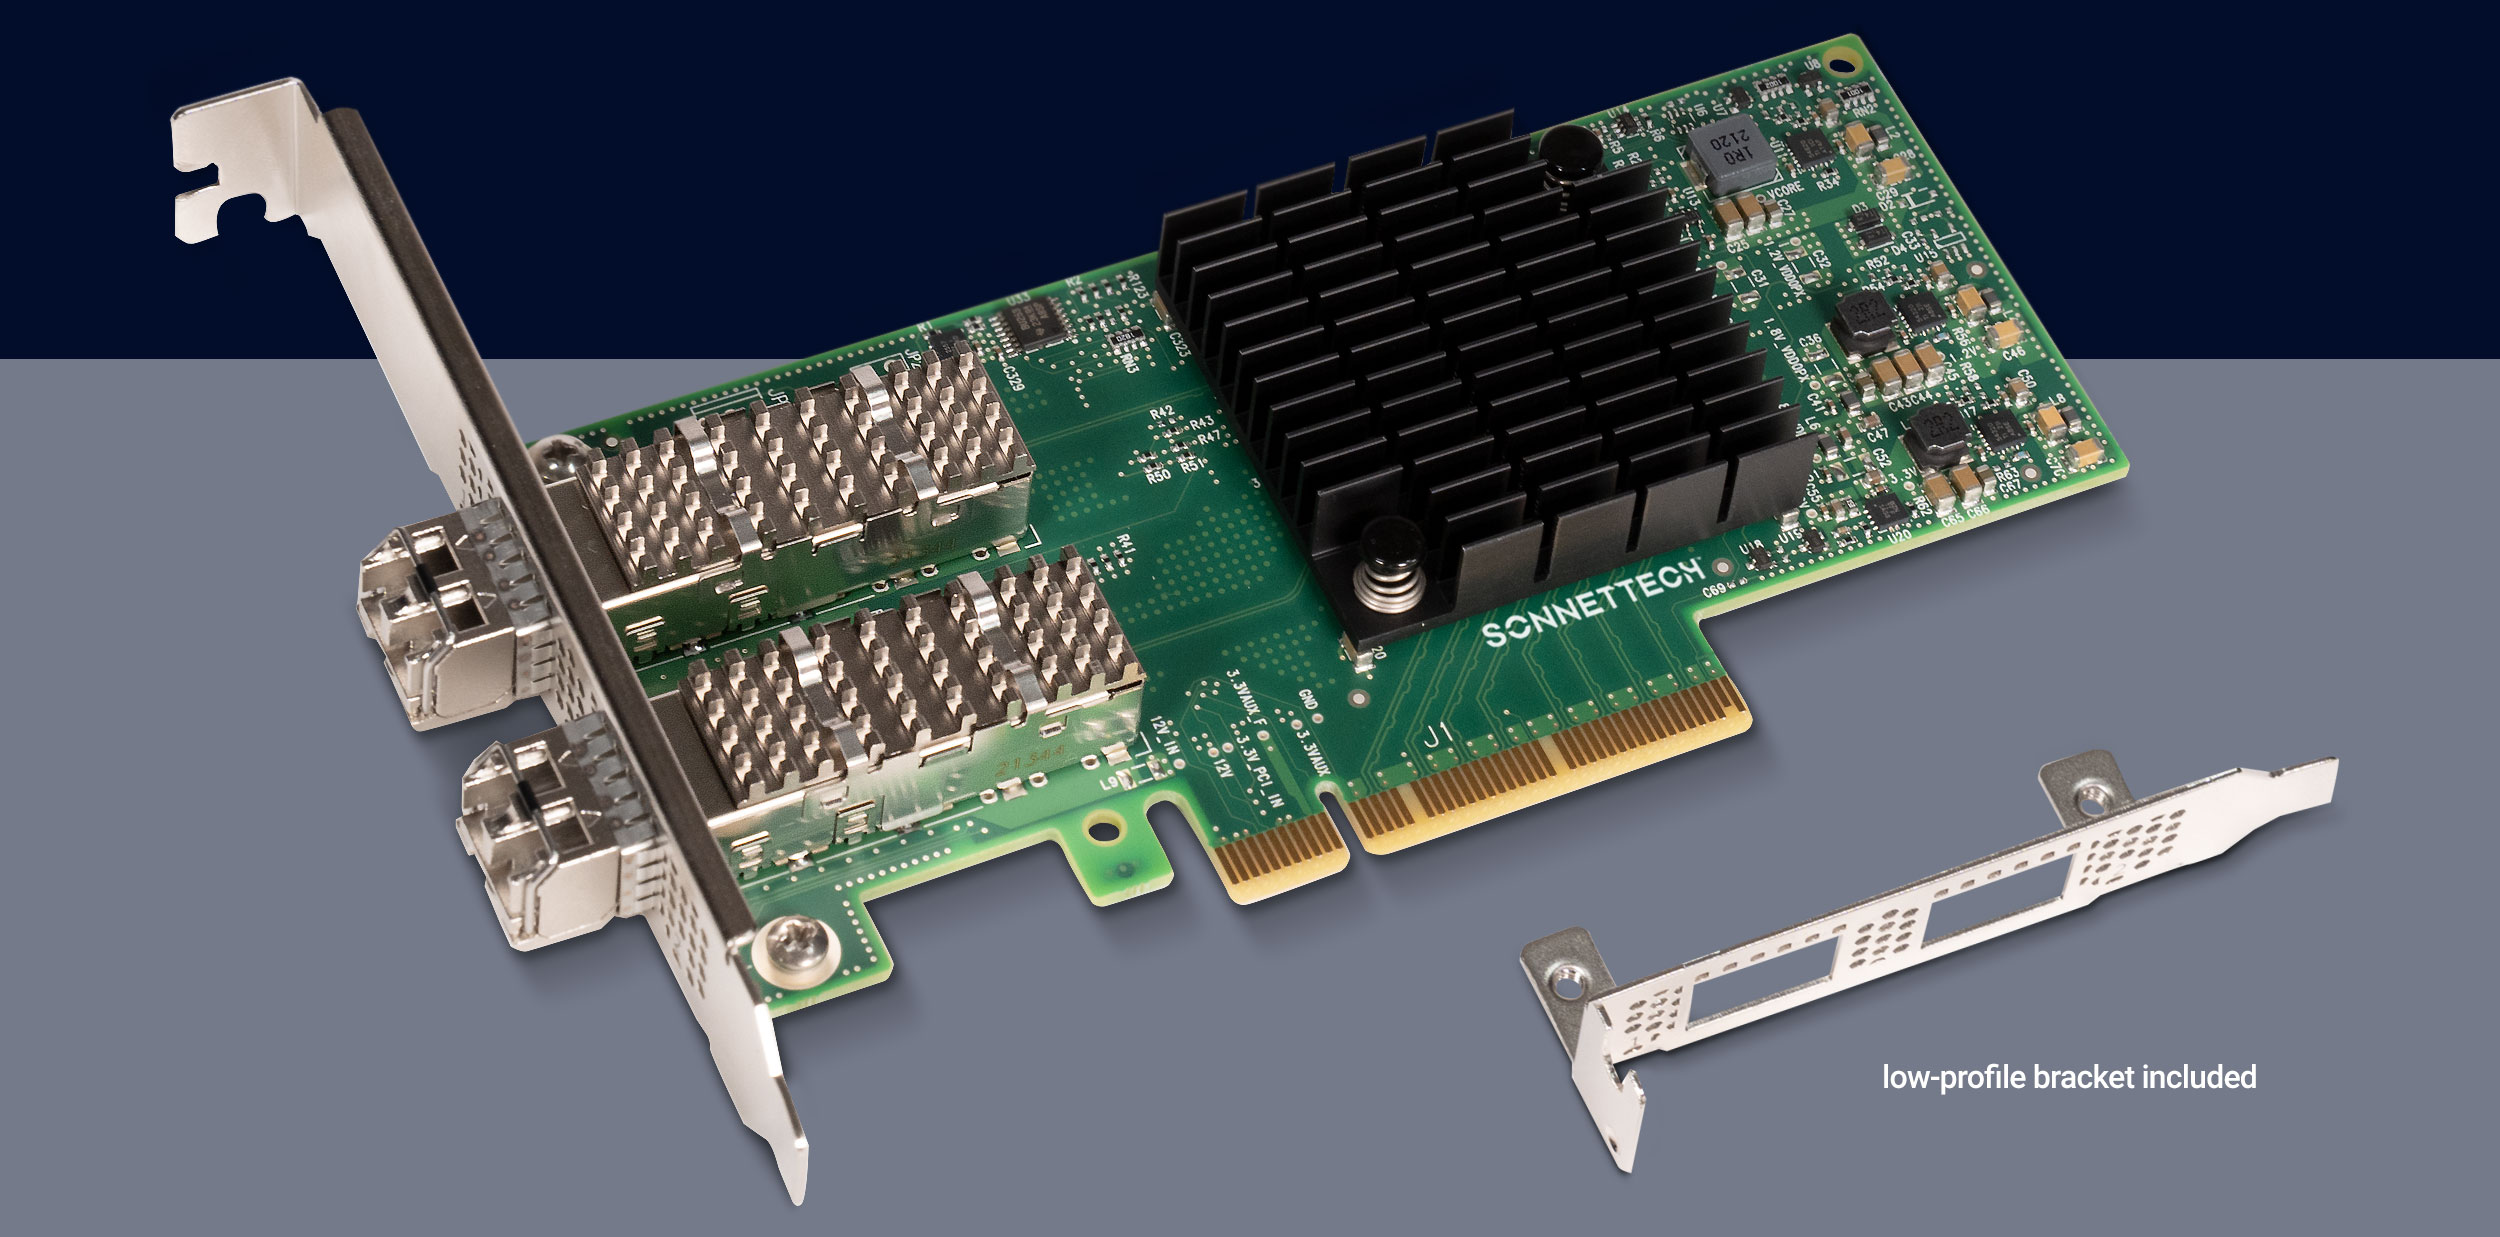 Twin25G PCIe Card Shown with Full-profile Bracket and Separate Included Low-profile Bracket